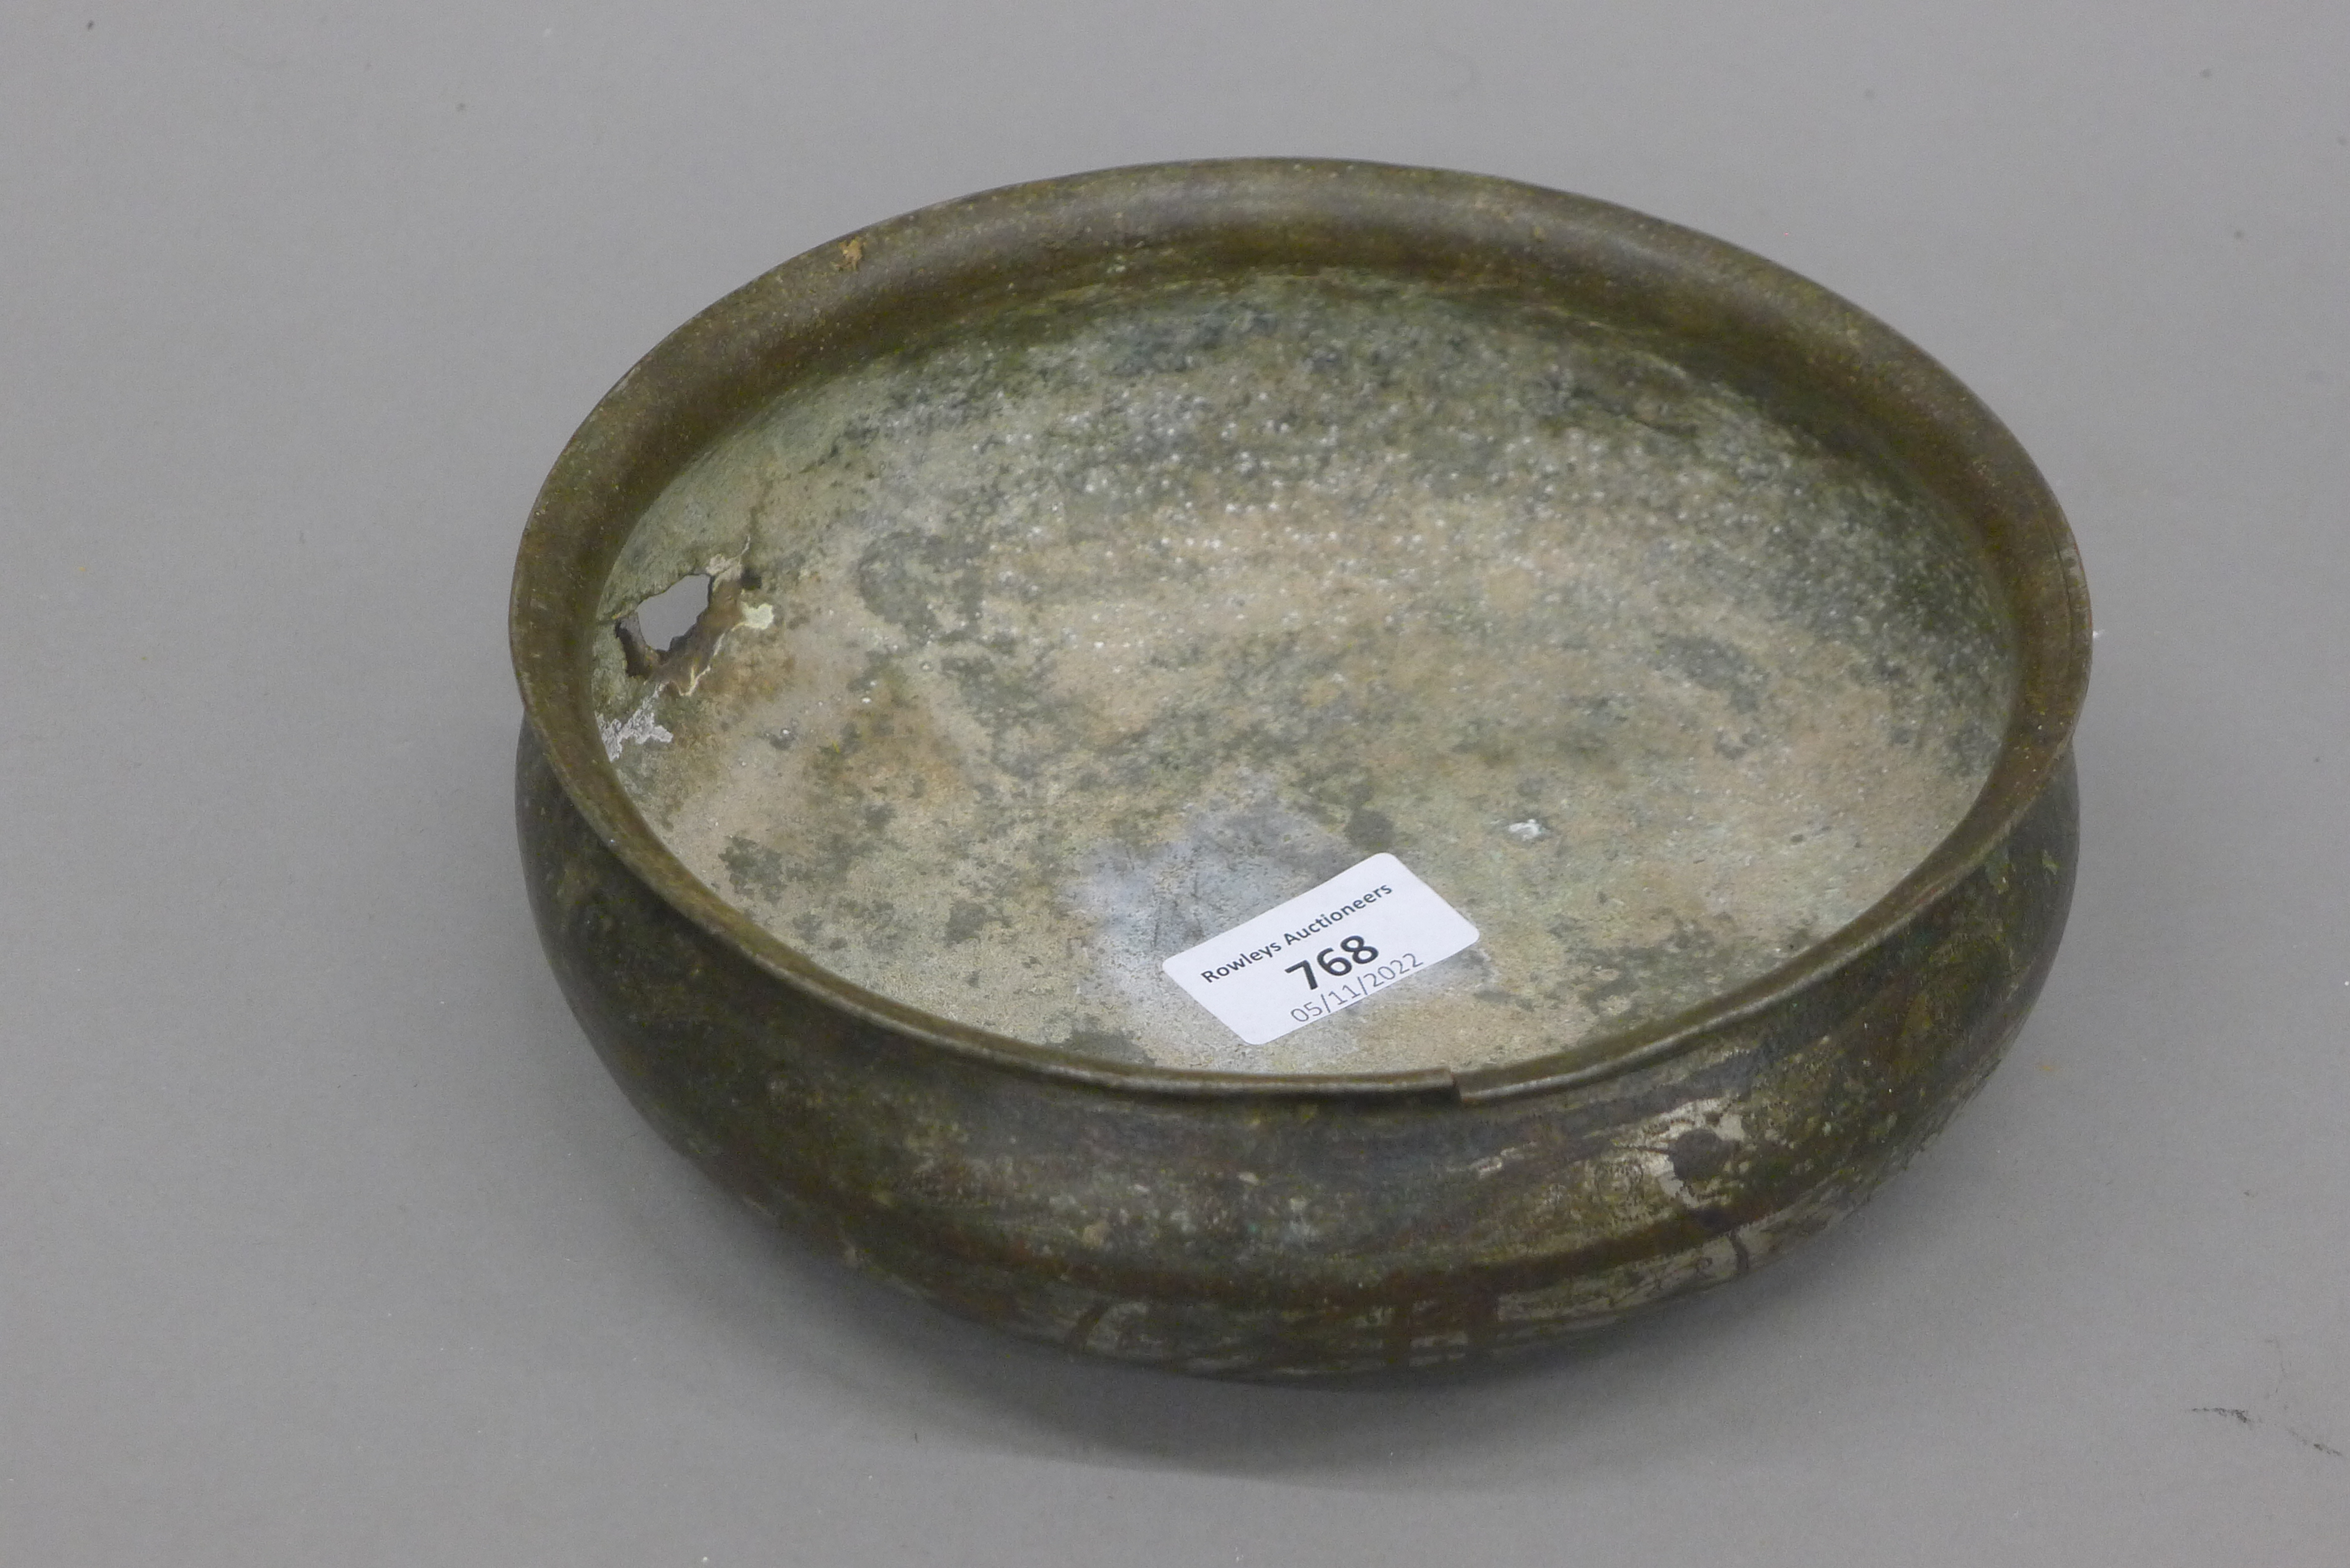 A 17th/18th century unmarked silver onlaid Islamic bowl. 19.5 cm diameter. - Image 2 of 6